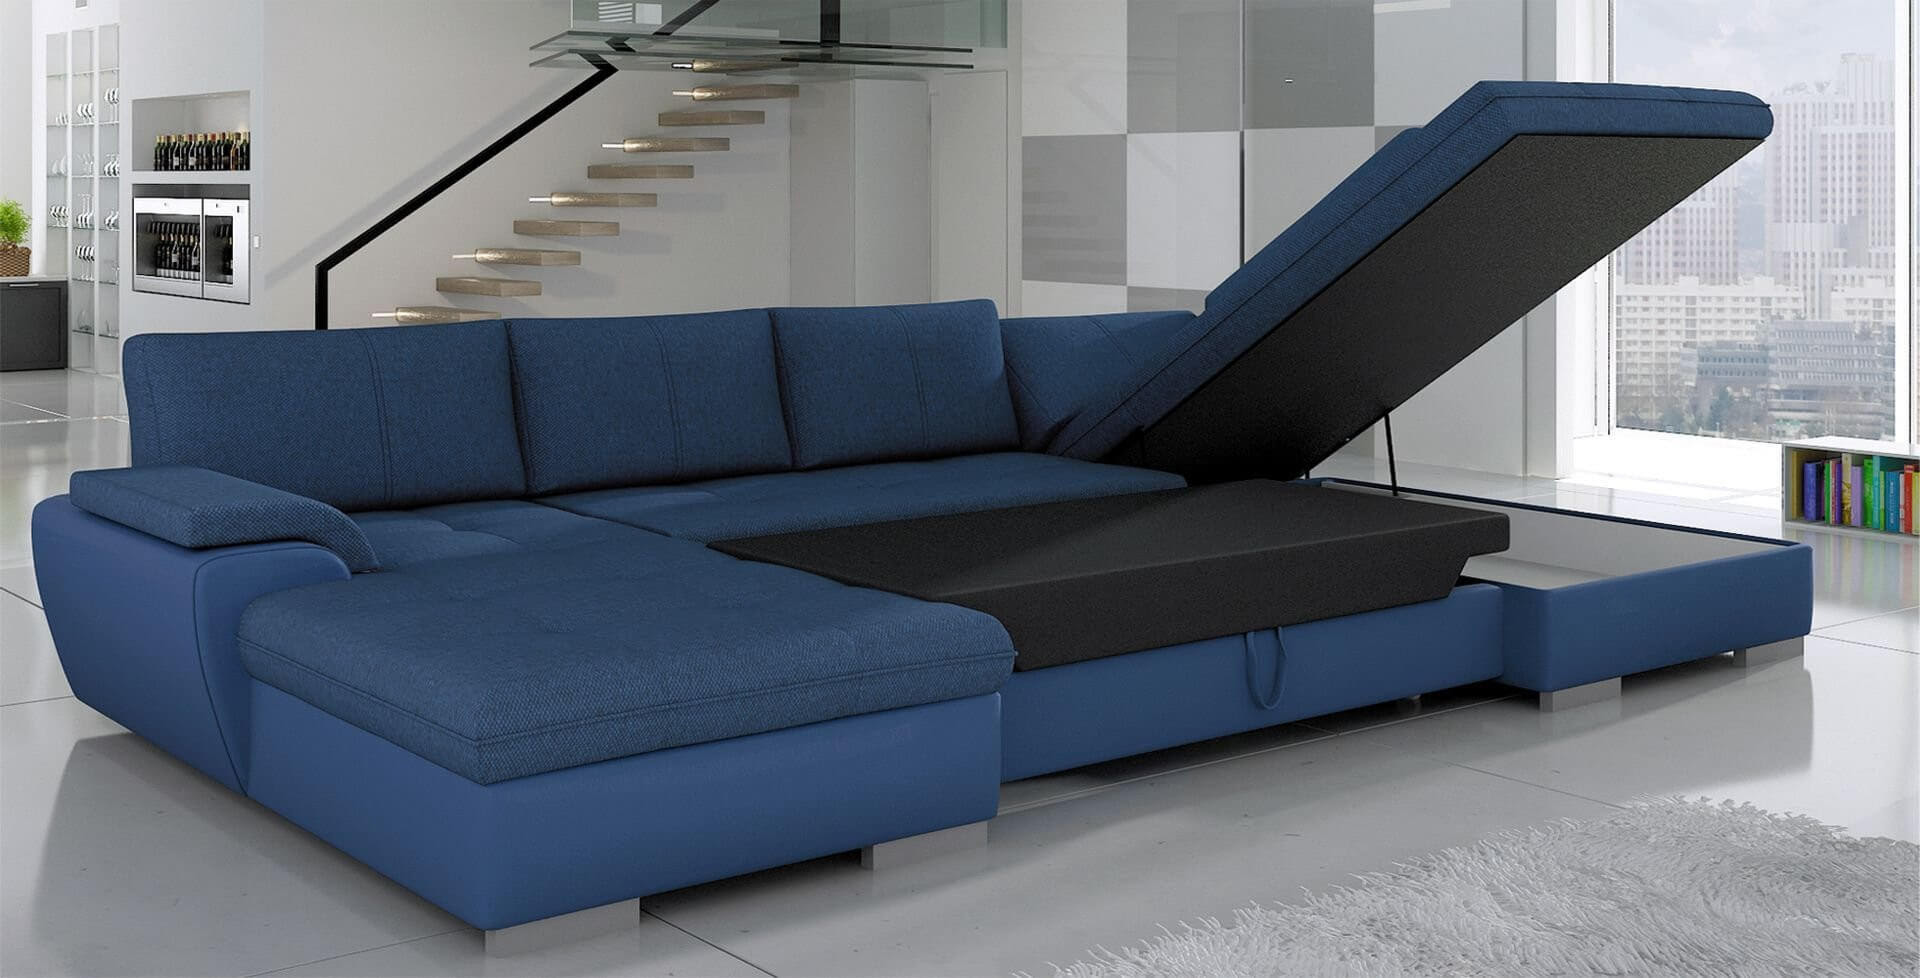 21+ Stylish And Unique Sofa Designs For A Modern Home ...